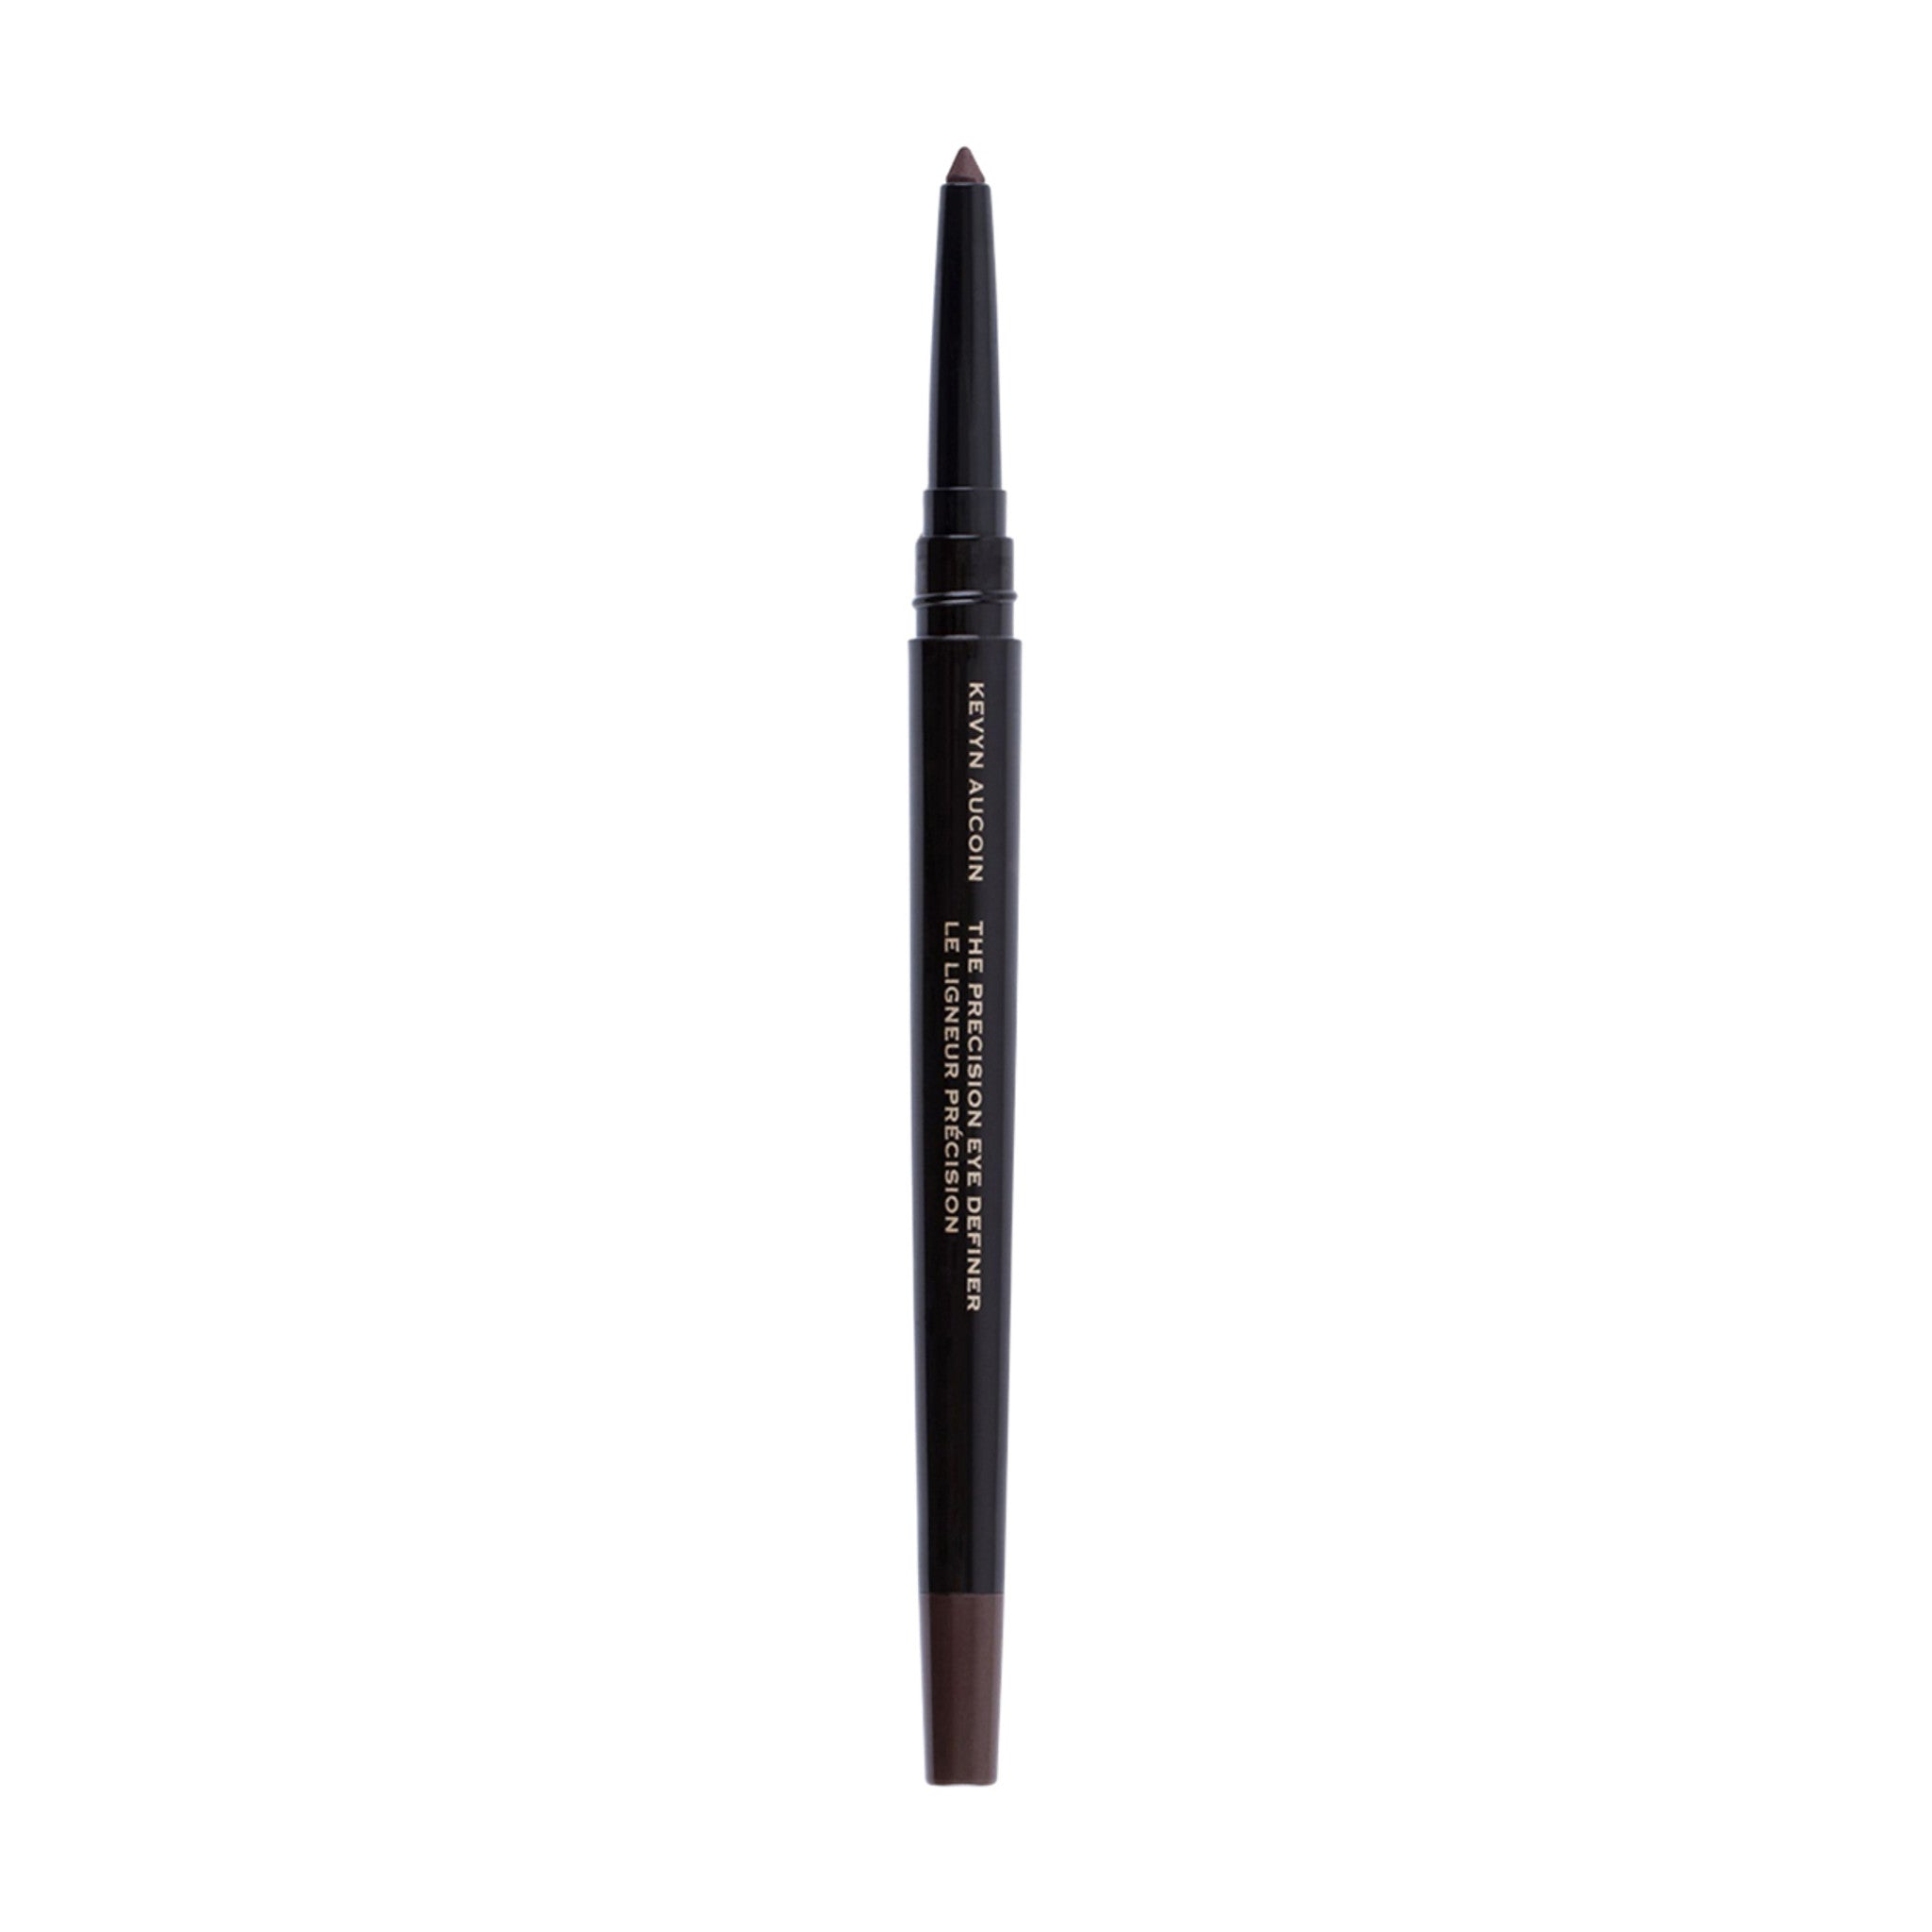 Kevyn Aucoin The Precision Eye Definer Color/Shade variant: Vanta (Black) main image. This product is in the color black